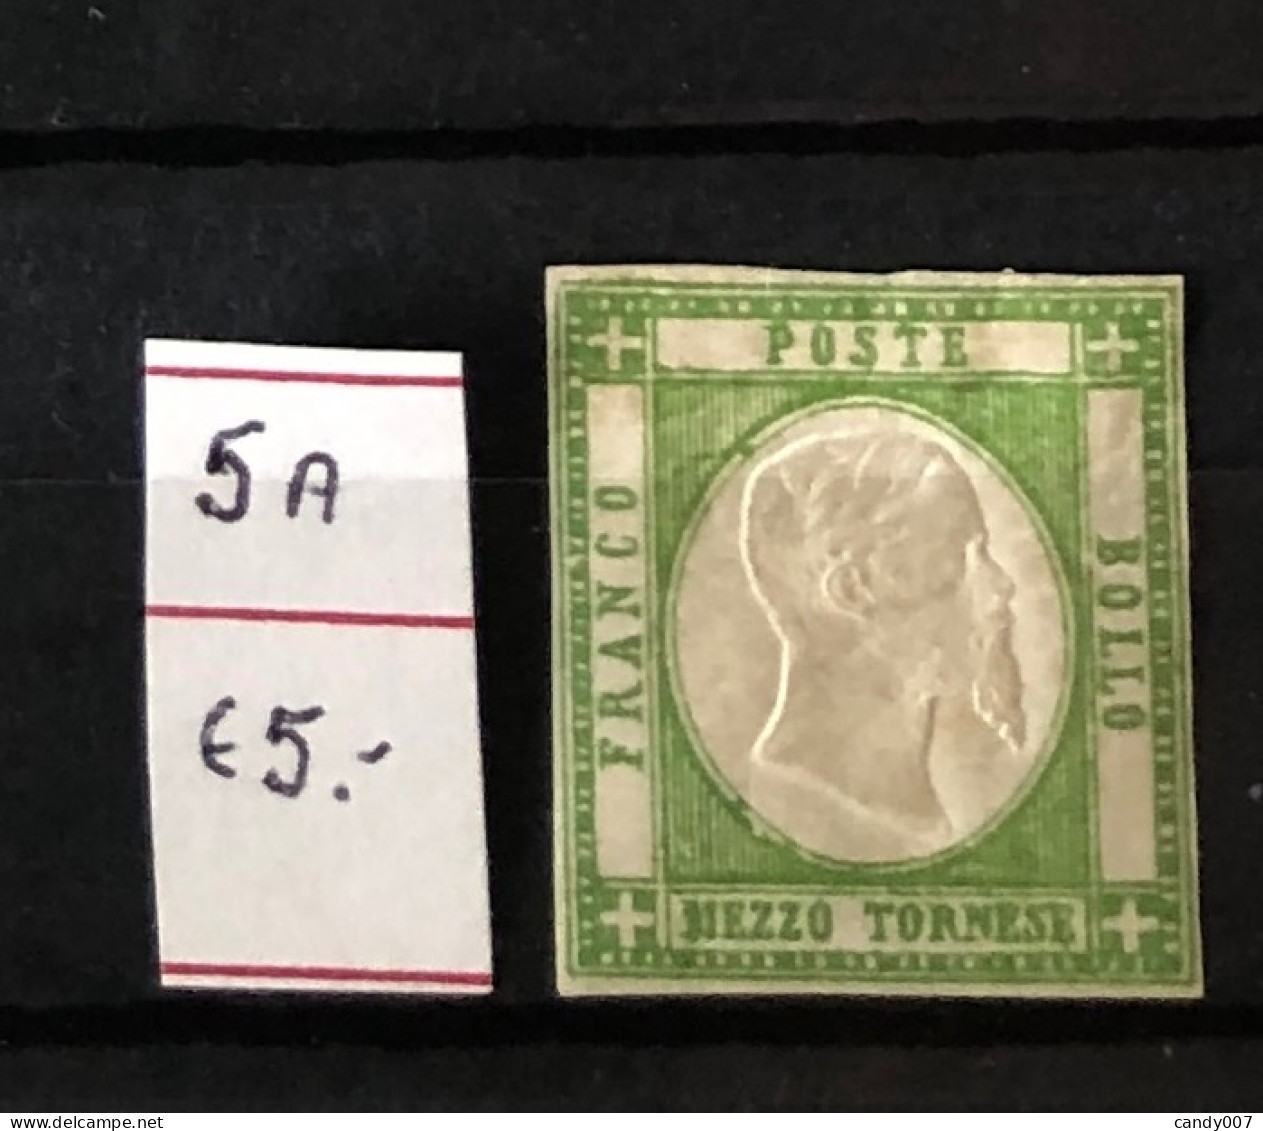 Italie Timbres N°5A De 1862 Neuf* - Mint/hinged